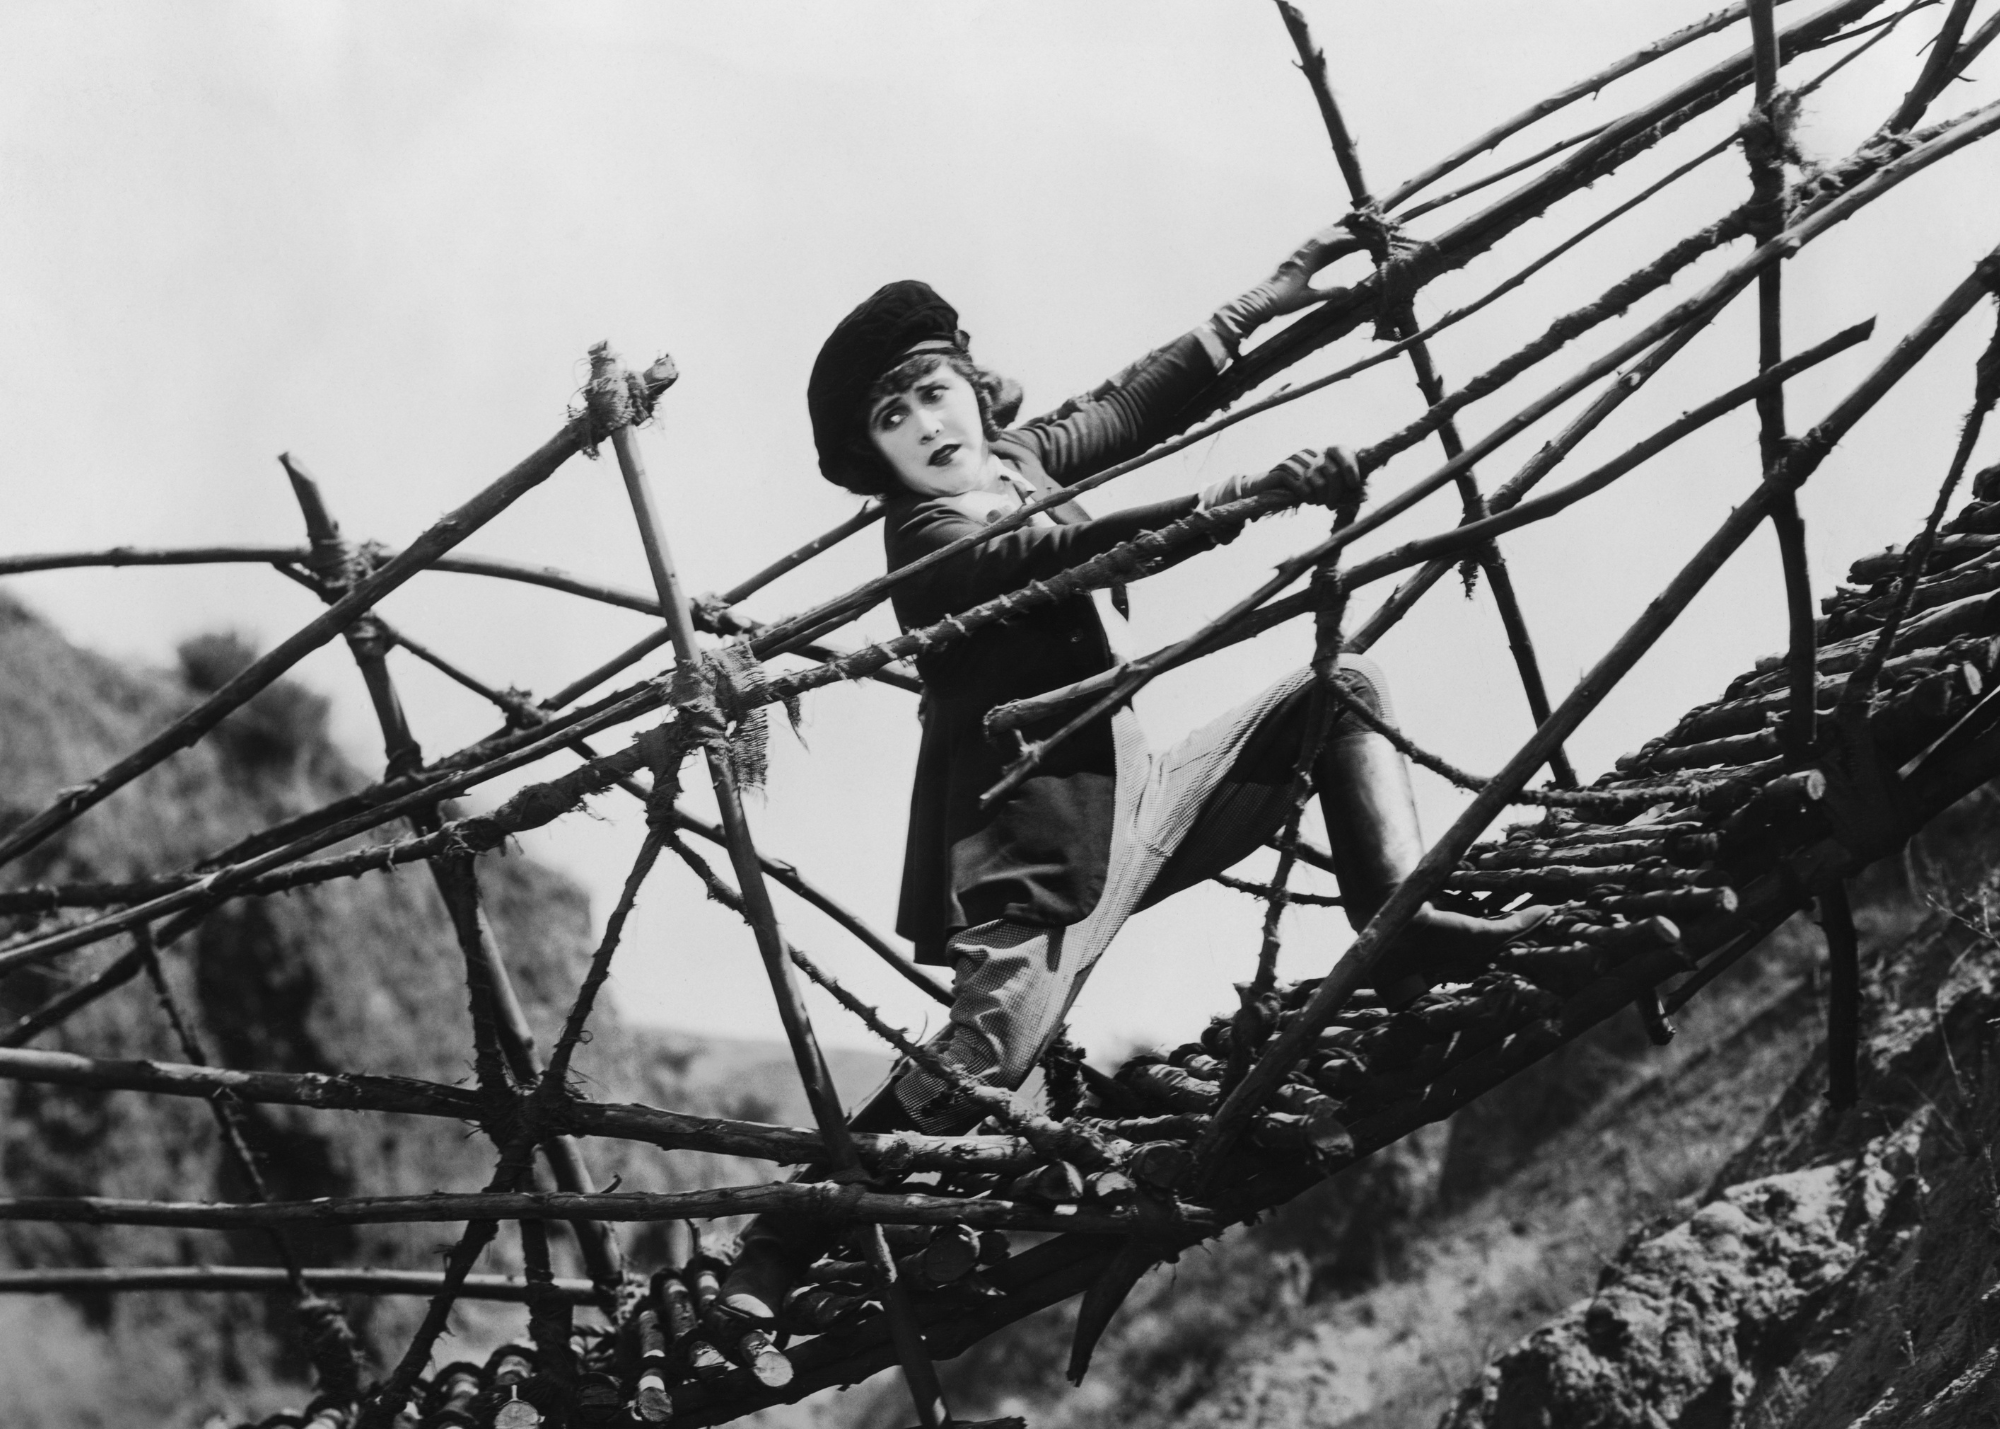 Person in black and white film clinging to falling bridge